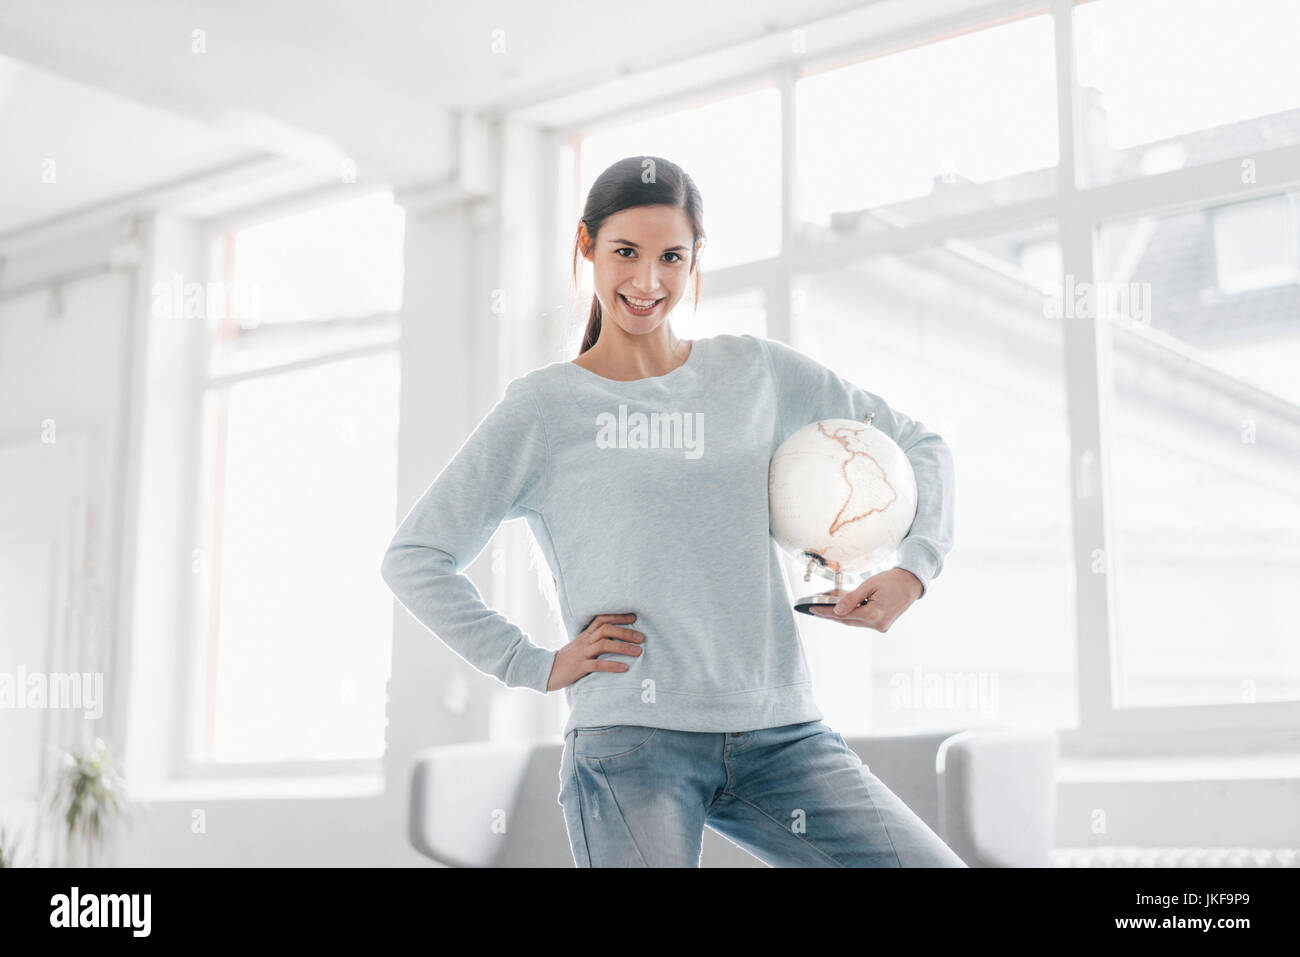 Young woman holding globe, planning world trip Stock Photo